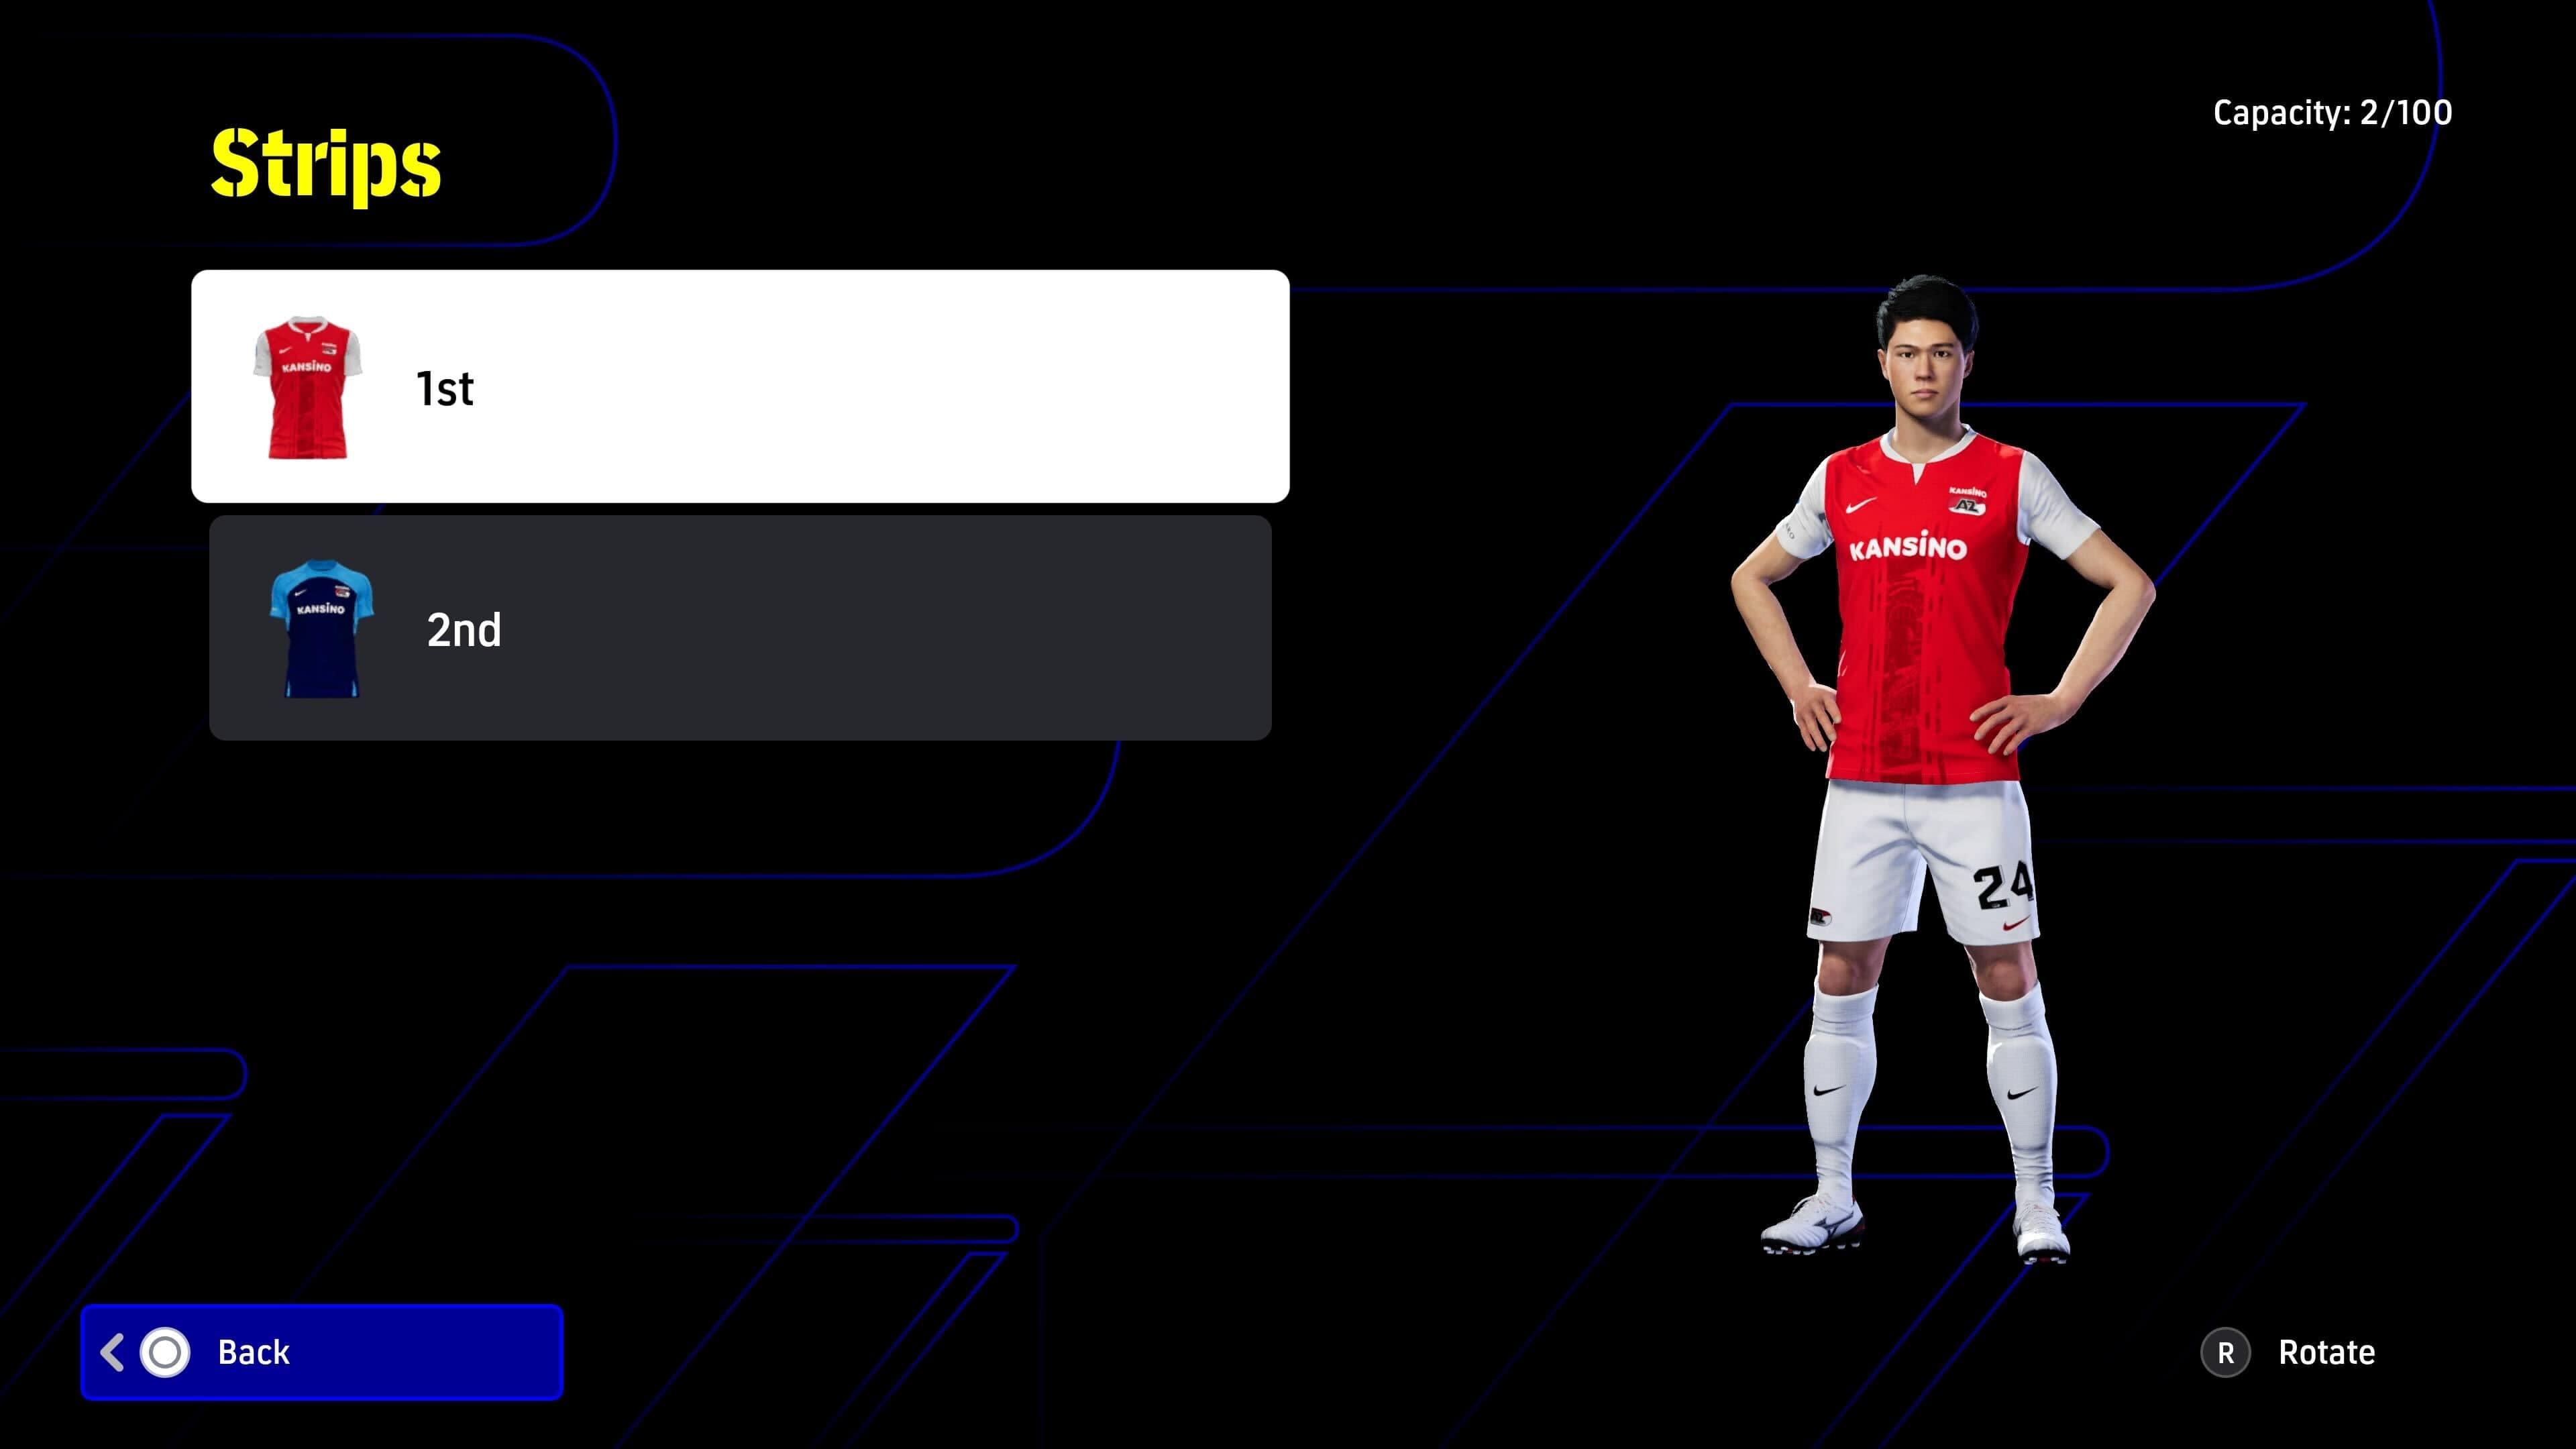 A screenshot of an eFootball game showcasing a player with customizable kit options.